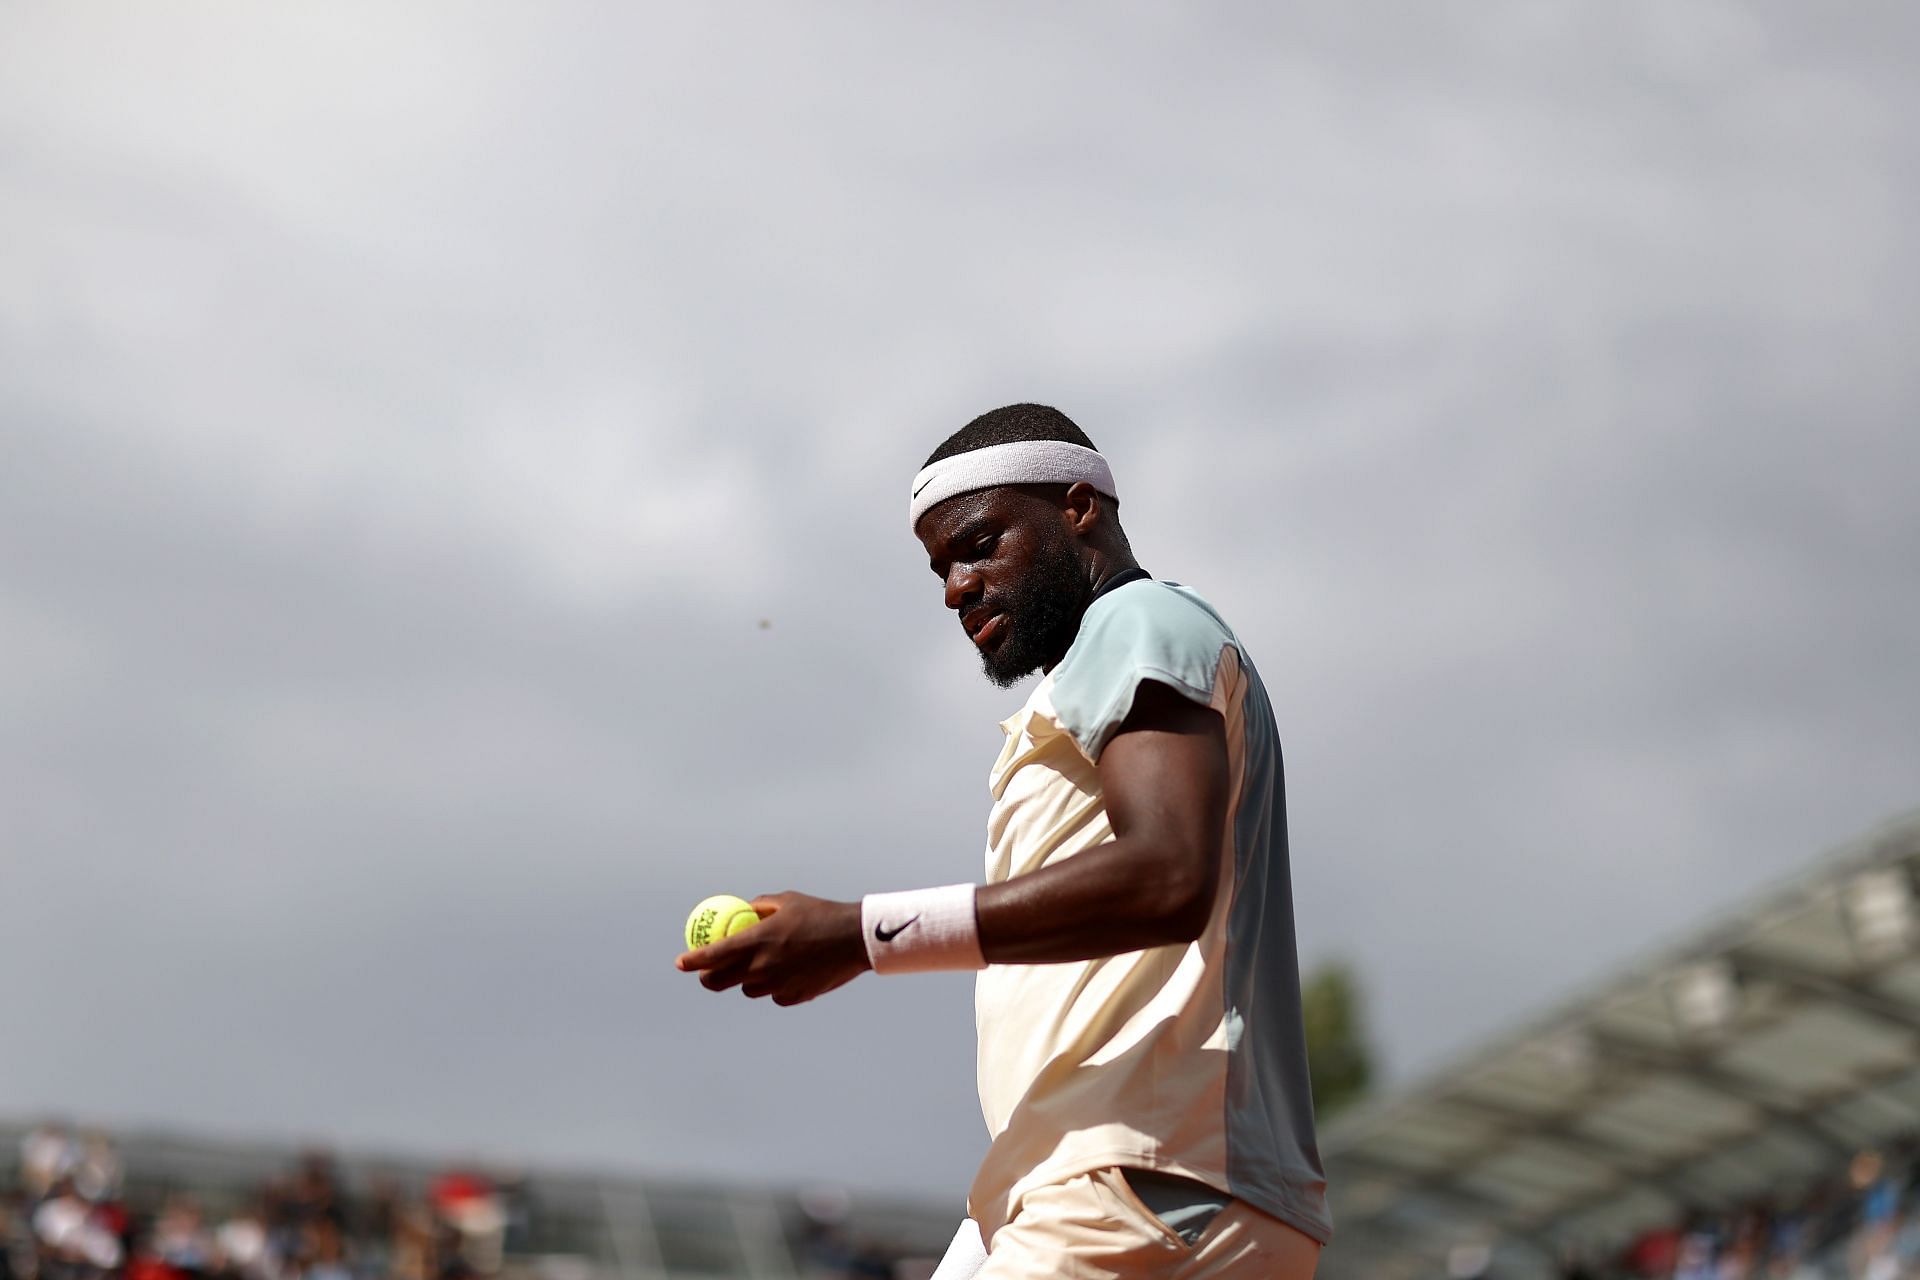 Frances Tiafoe will look to get his second victory over David Goffin